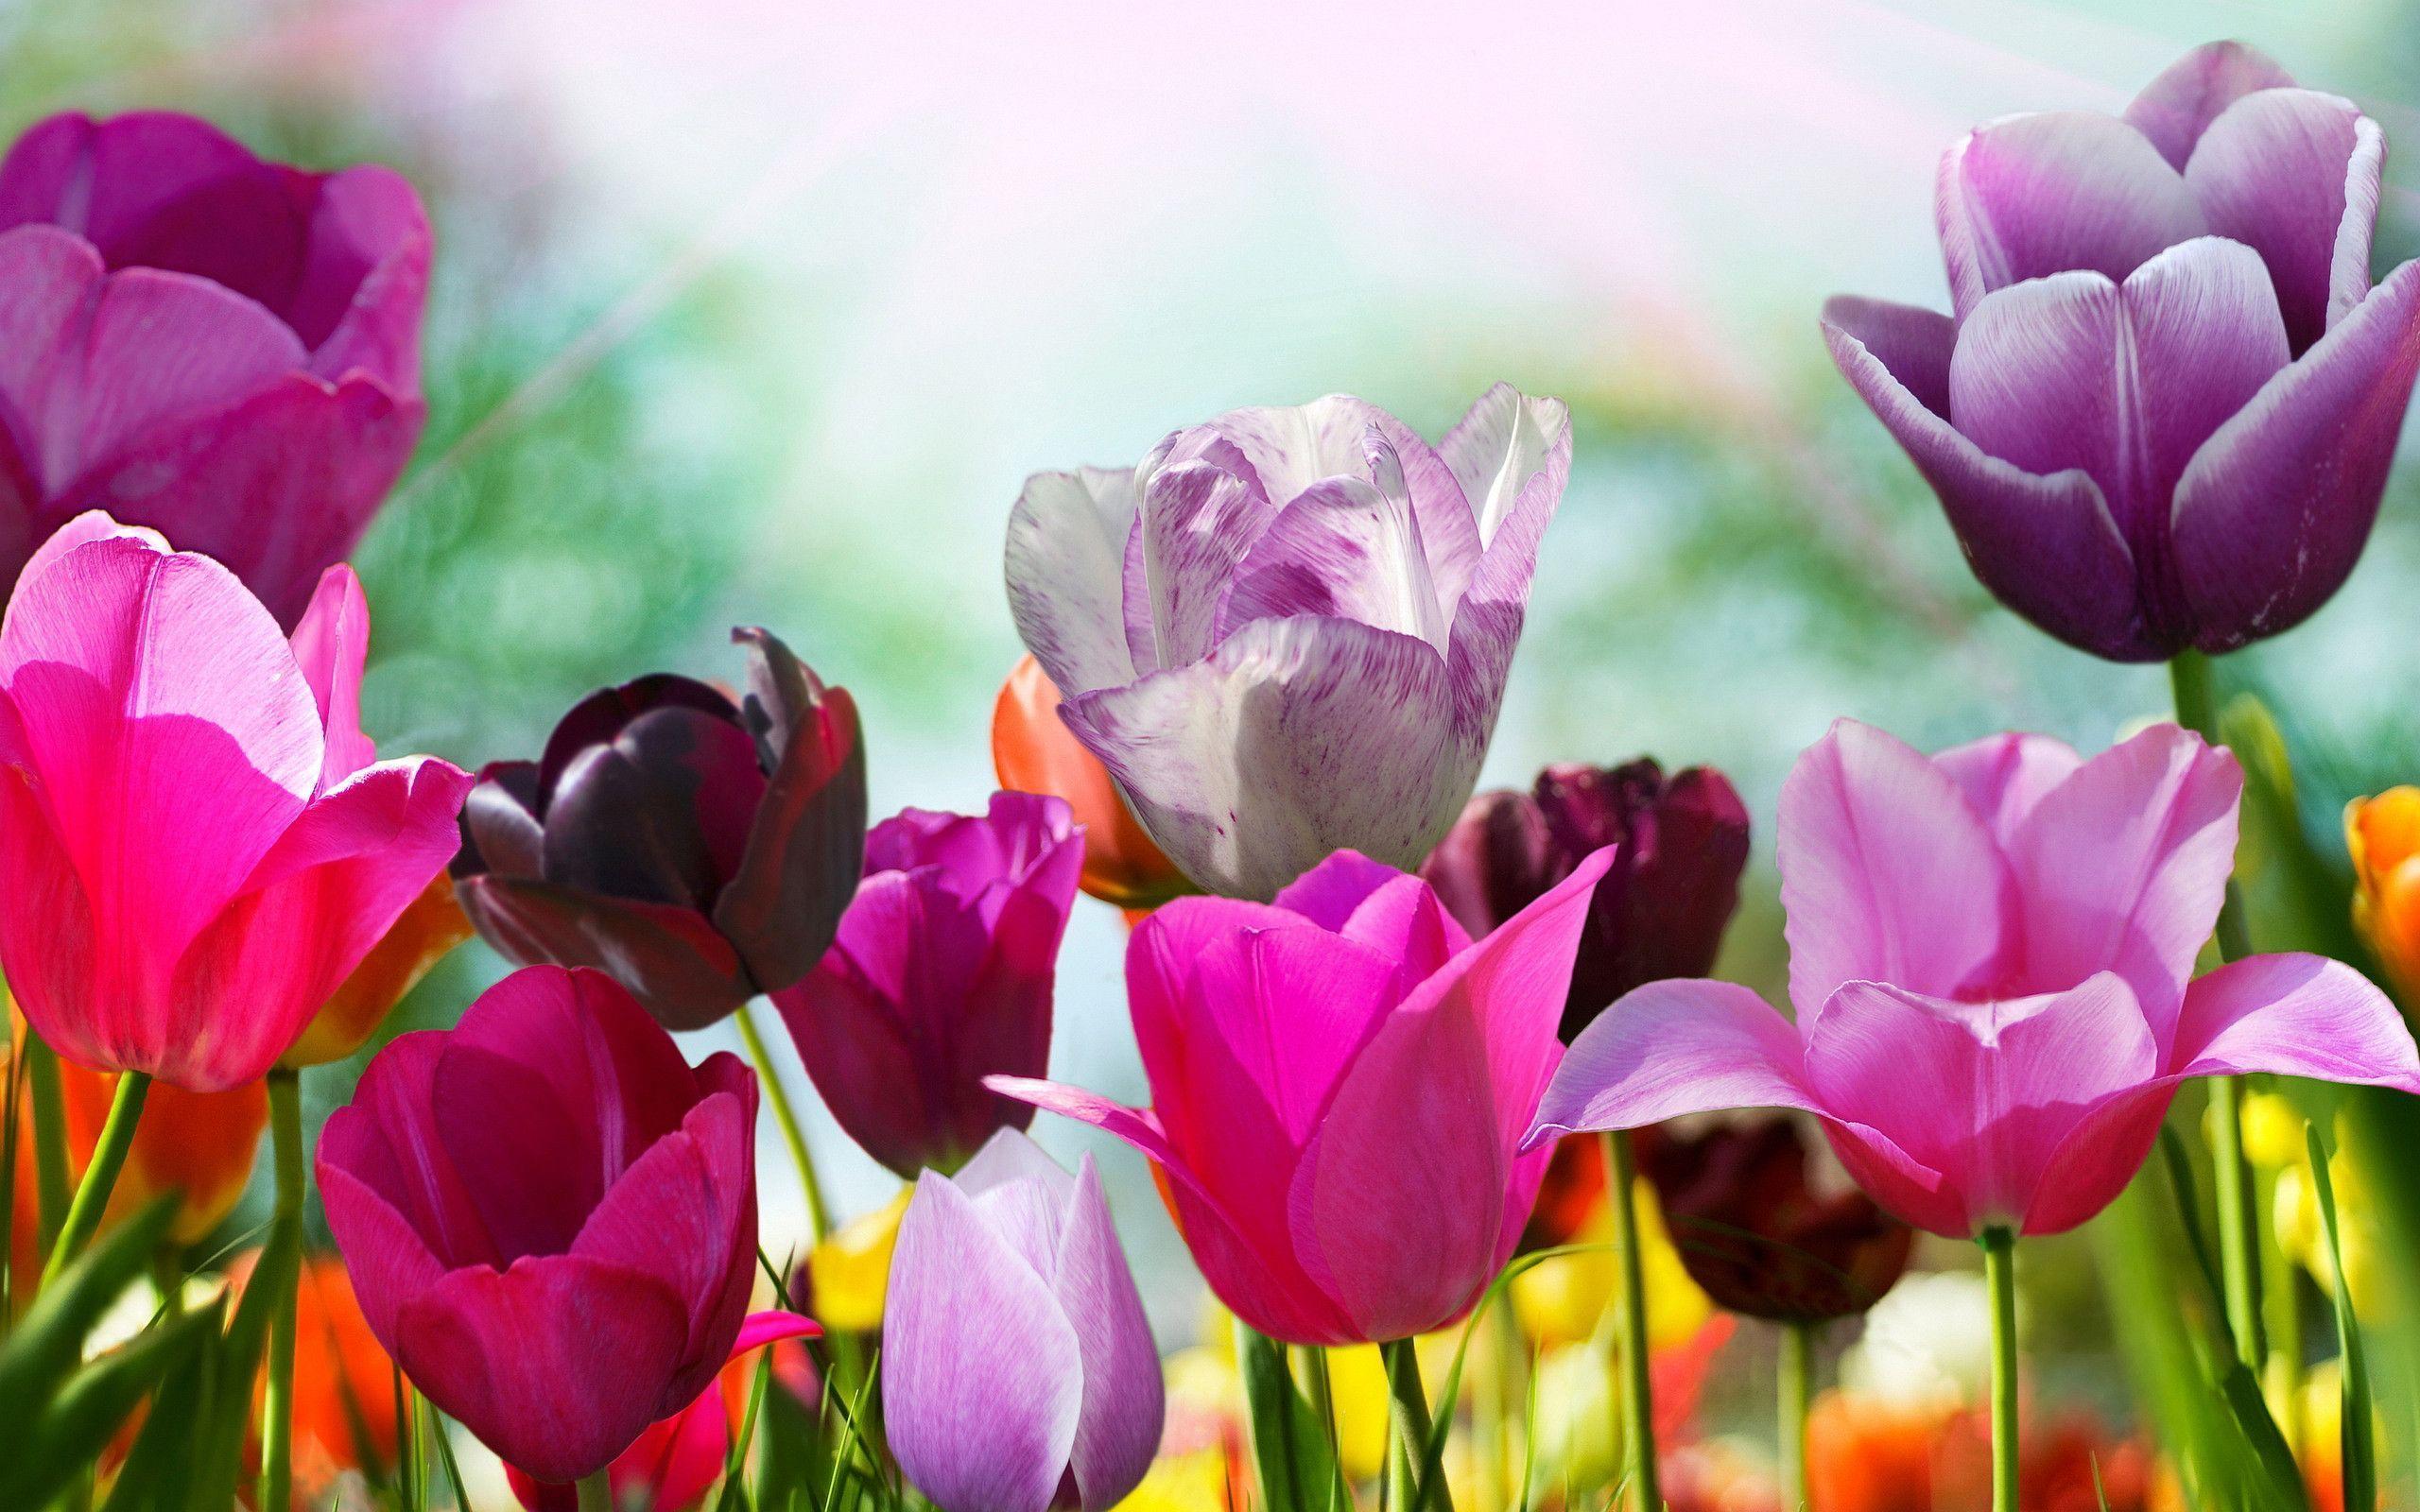 Purple Tulips HD Picture And Wallpaper. TanukinoSippo